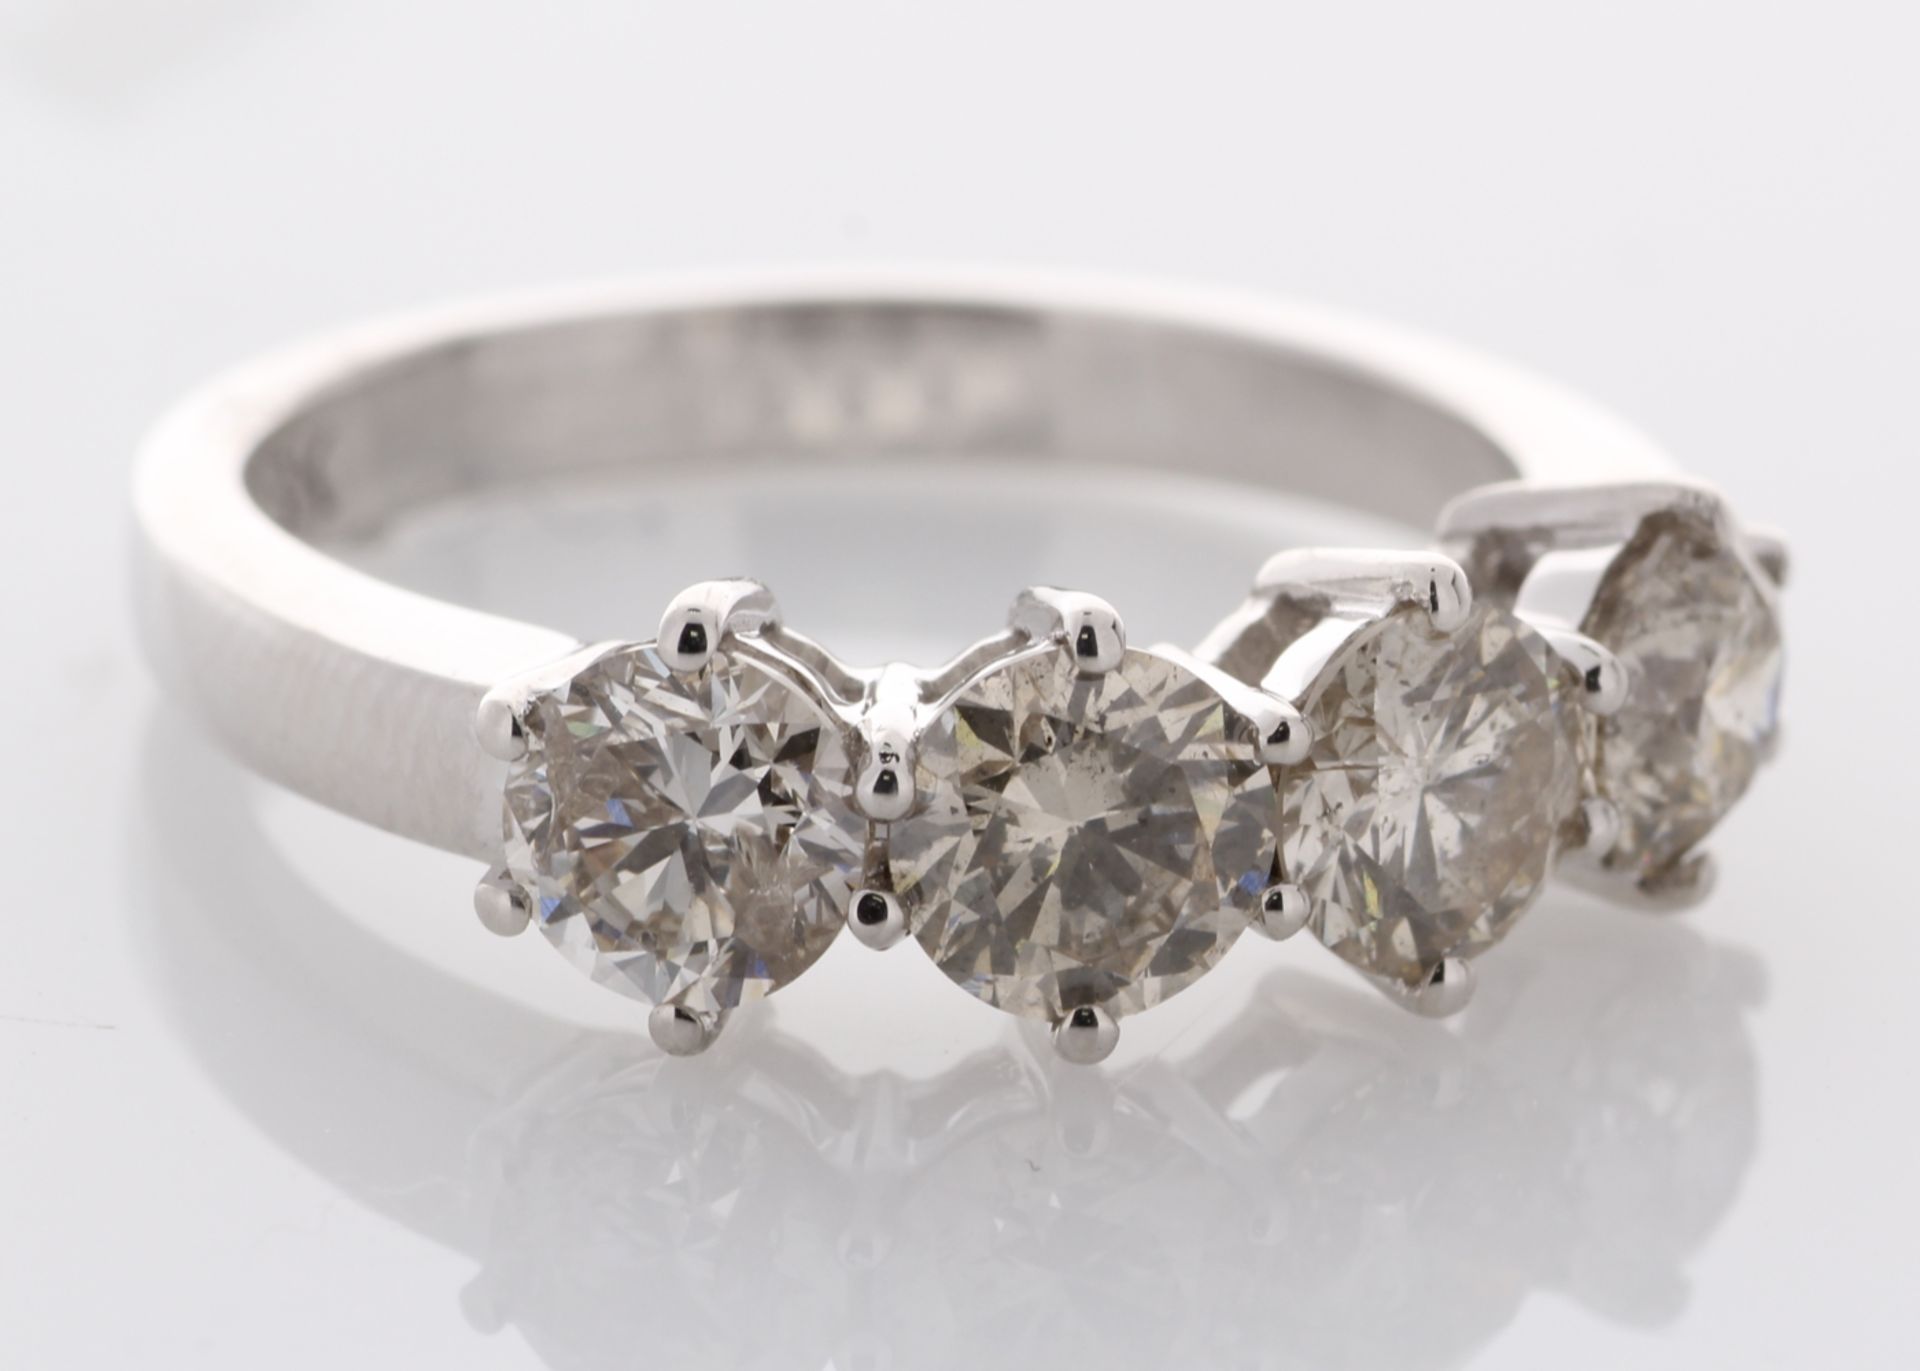 Valued by GIE £21,455.00 - 18ct White Gold Four Stone Claw Set Diamond Ring 2.10 Carats - 3145004, - Image 2 of 6